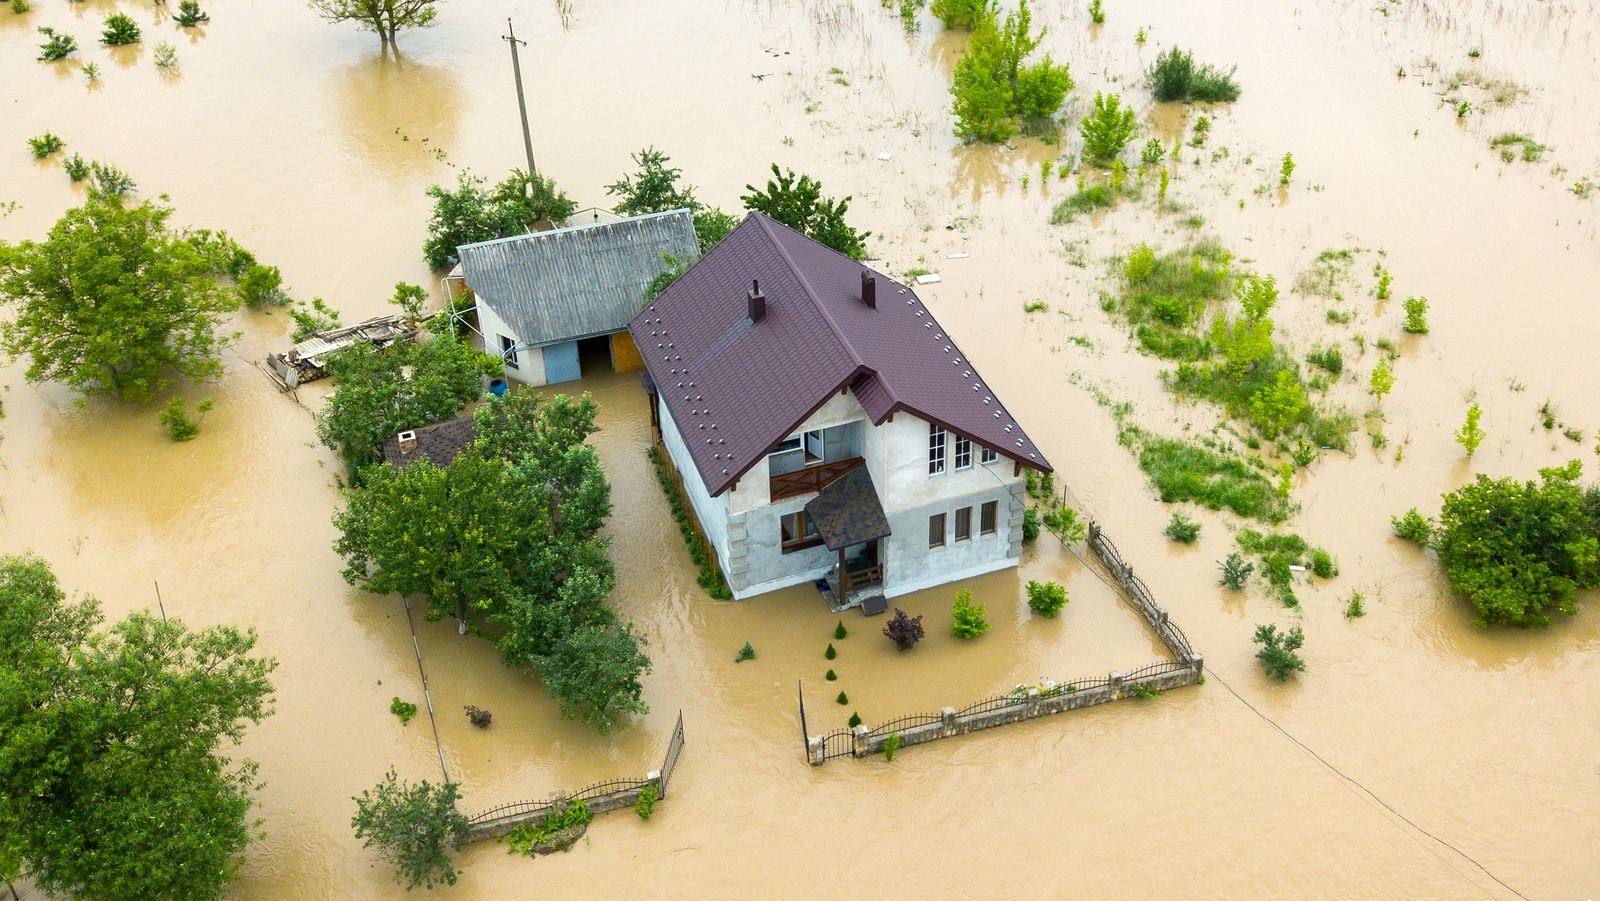 How To Determine If You Need Flood Insurance For Your Home